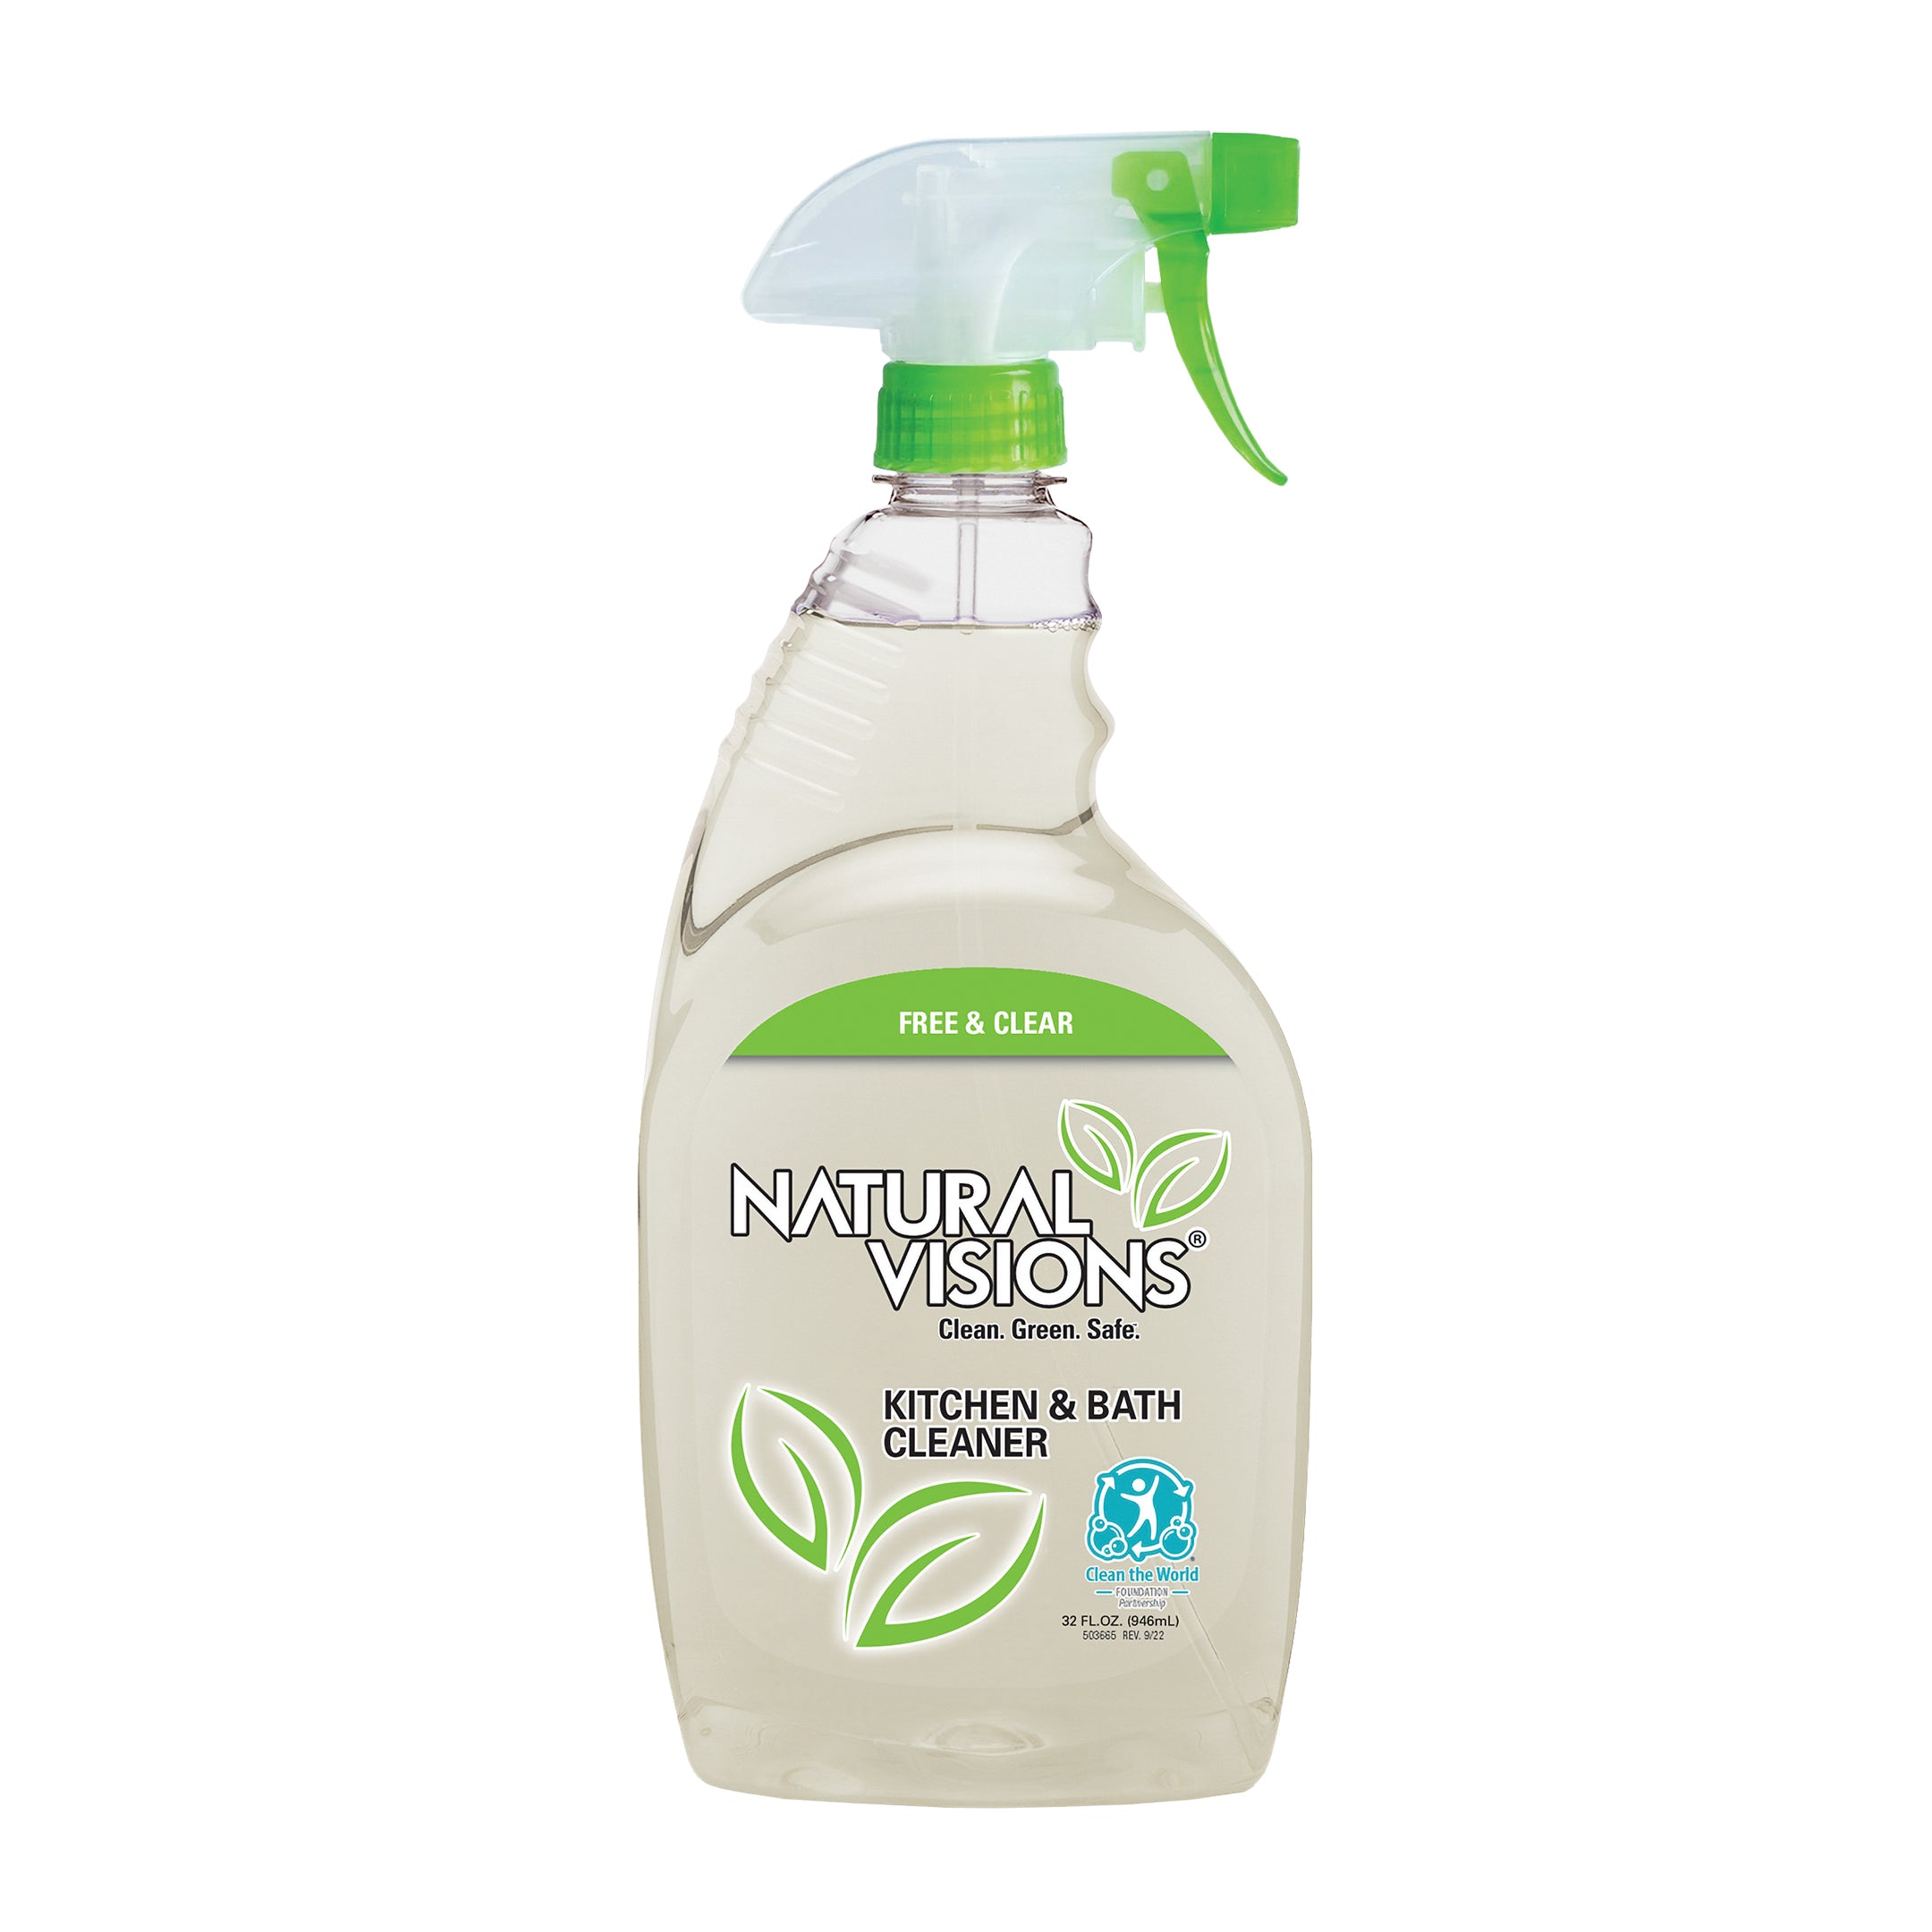 Natural Visions Free & Clear Kitchen & Bath Cleaner - 32oz/6pk